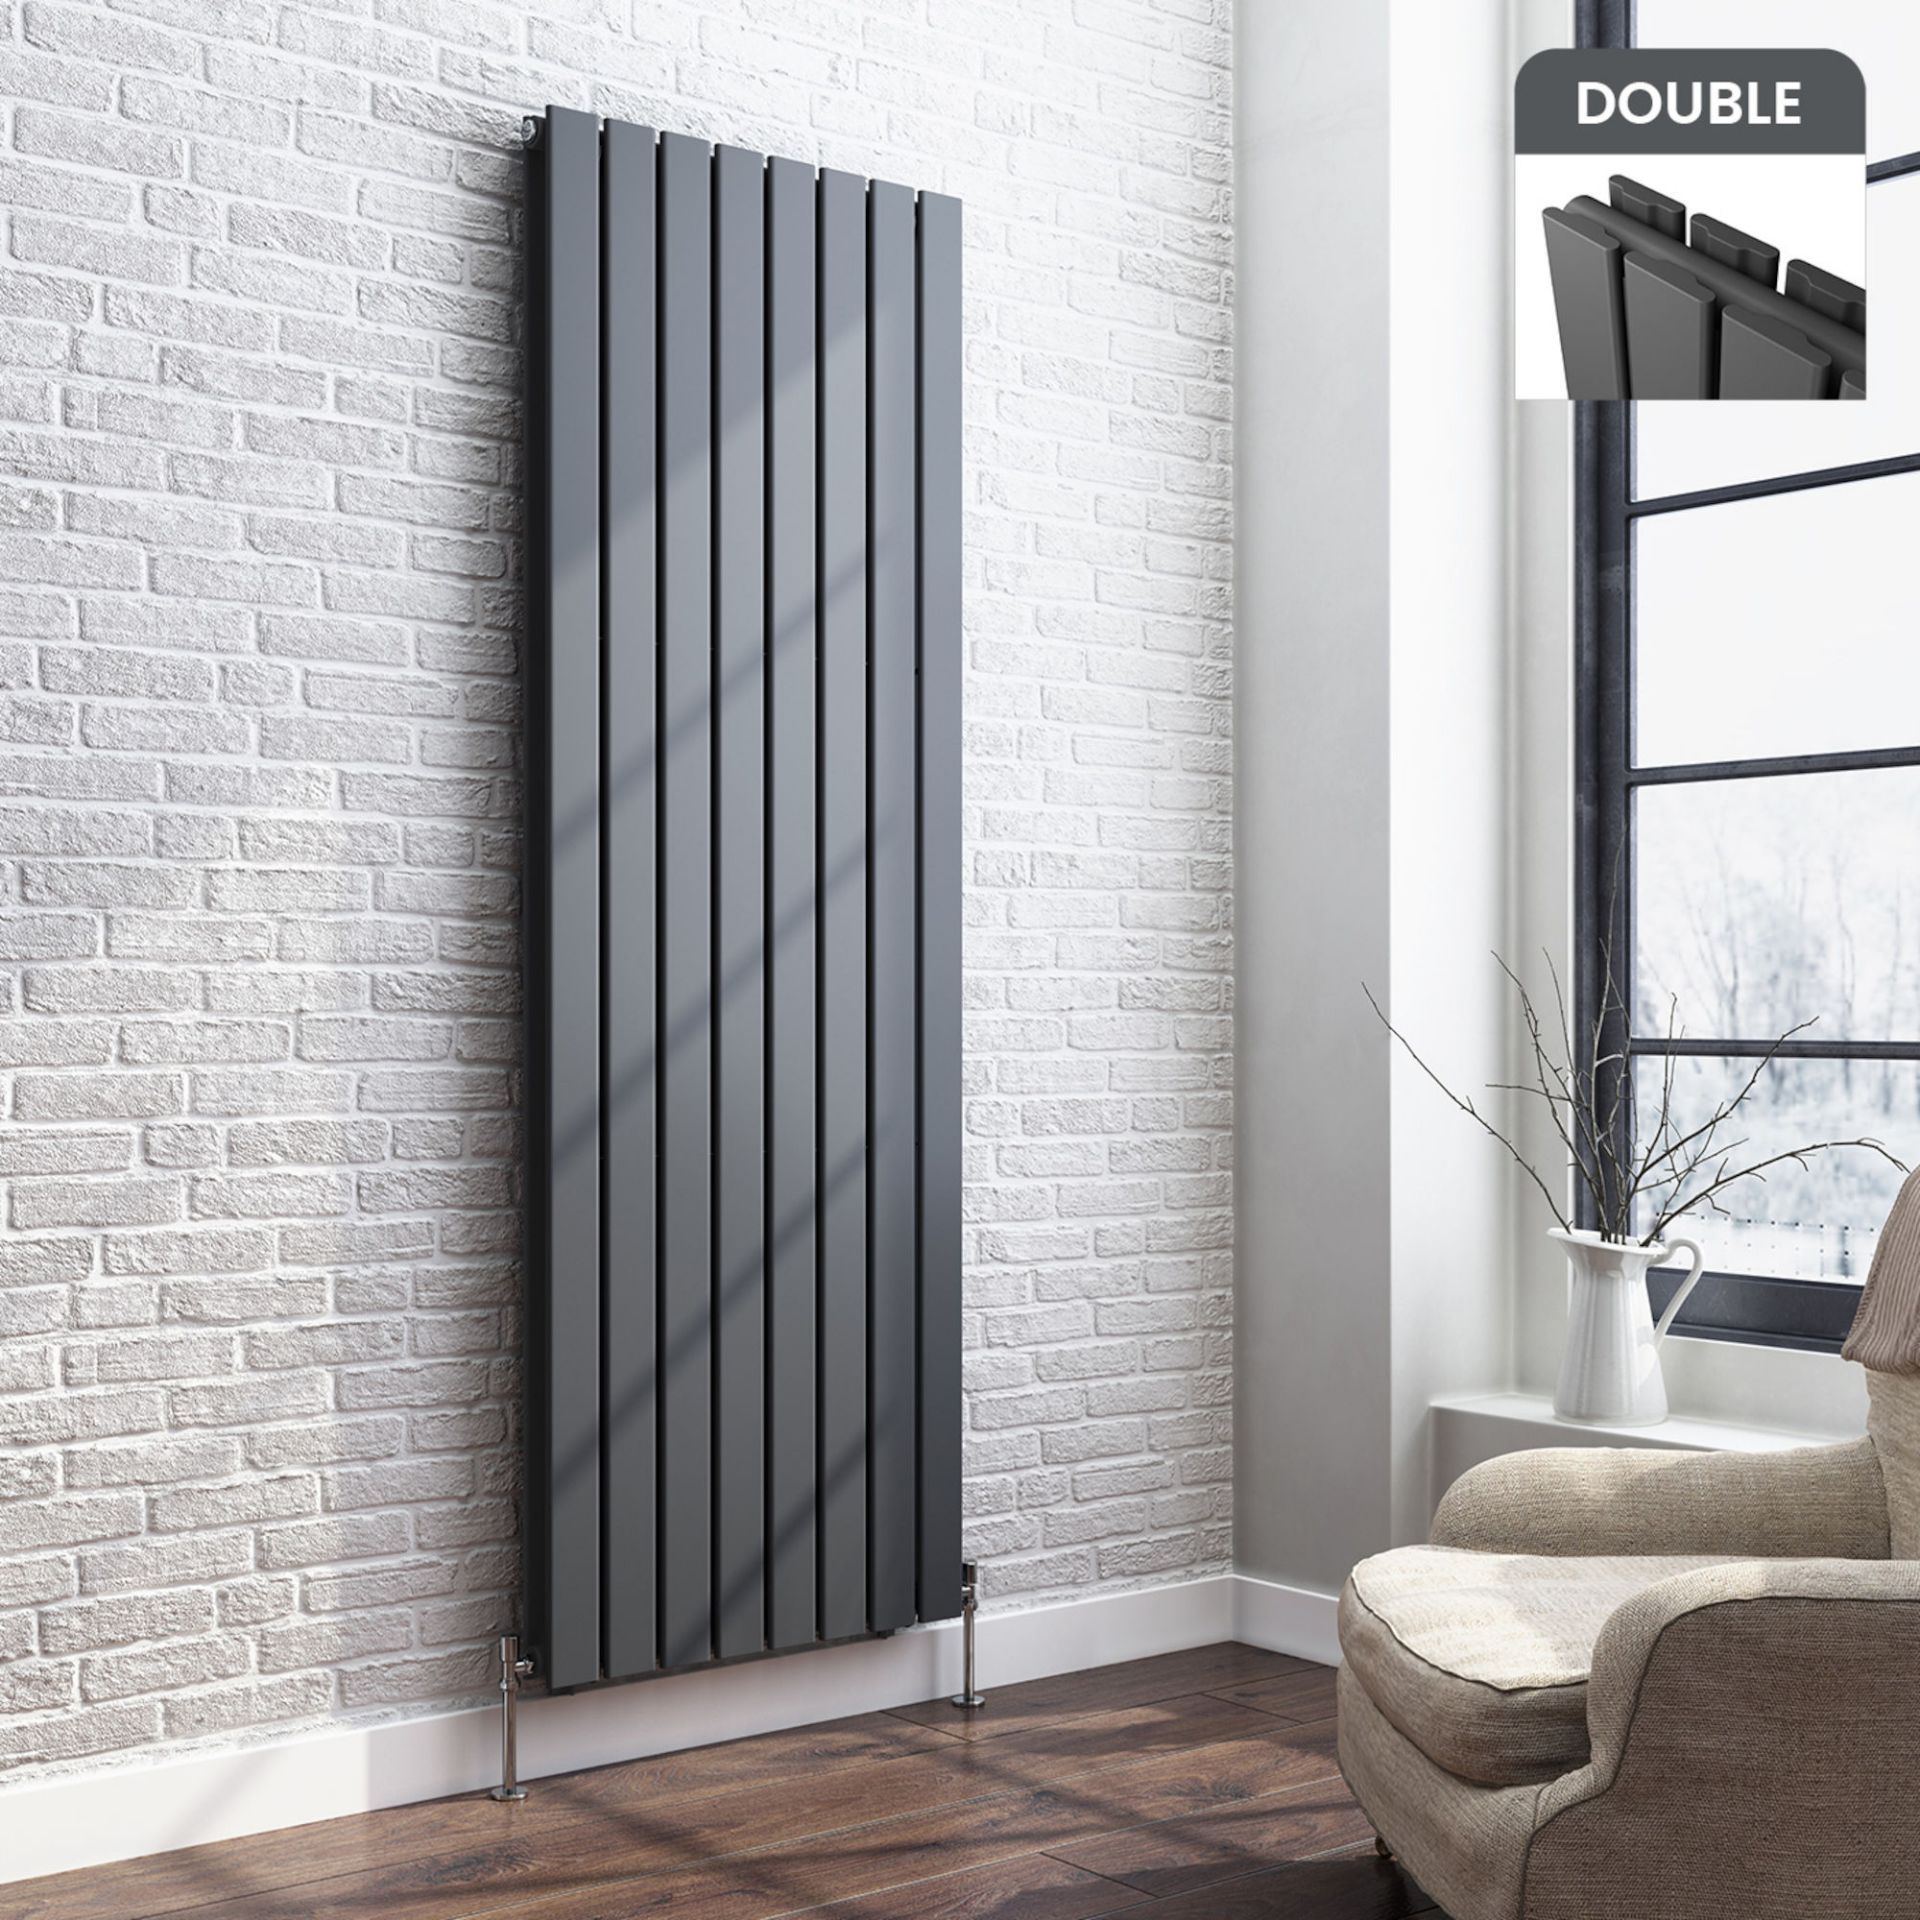 (DW13) 1800x608mm Anthracite Double Flat Panel Vertical Radiator - Premium. RRP £499.99. Ma...